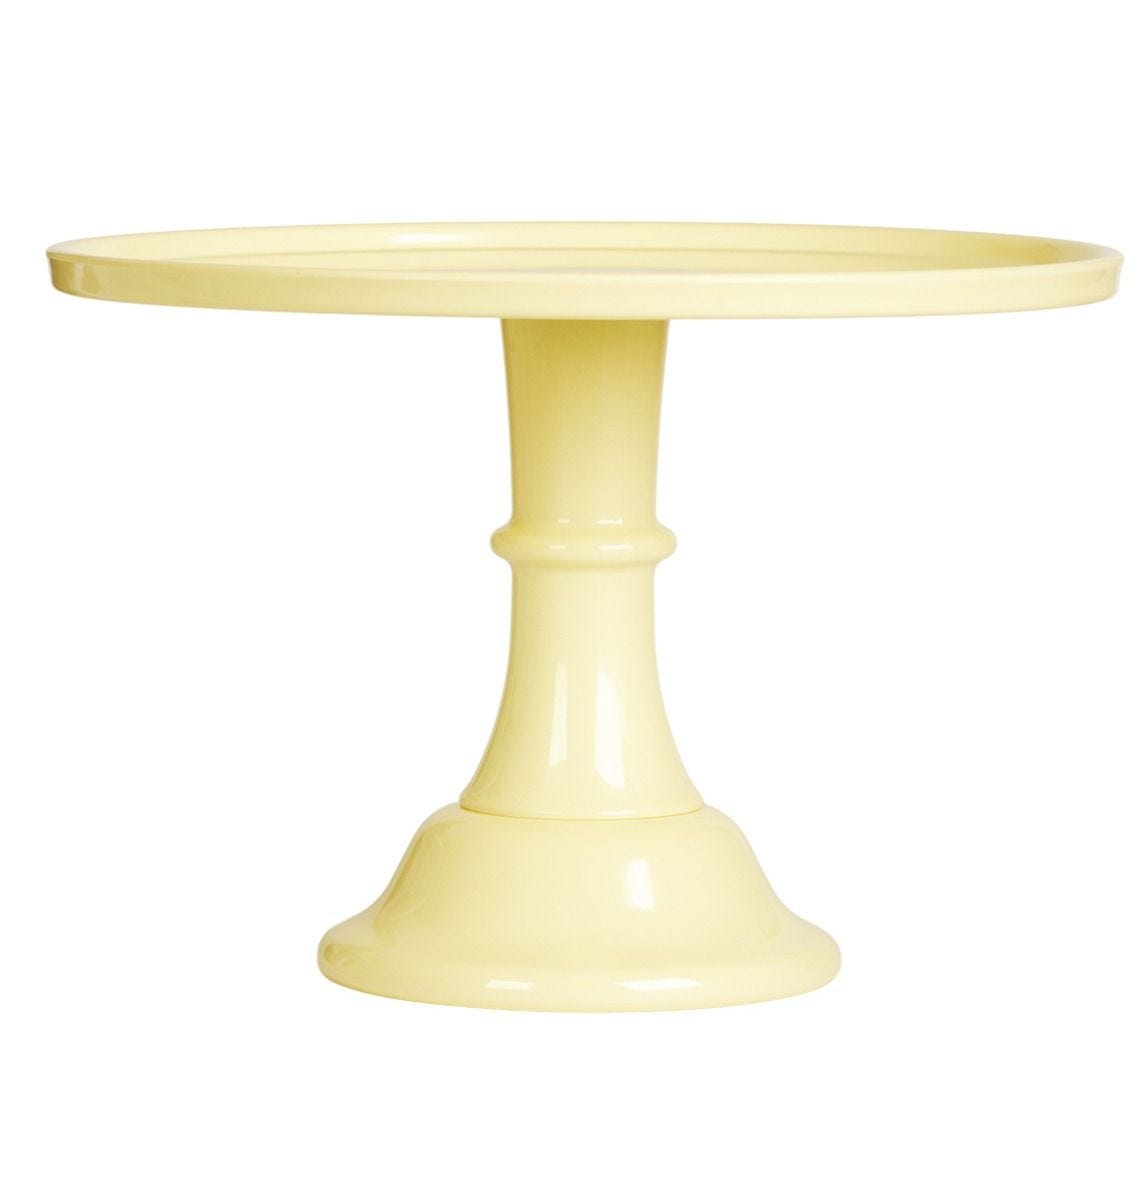 Hip Products LLC Large Yellow Melamine Cake Stand